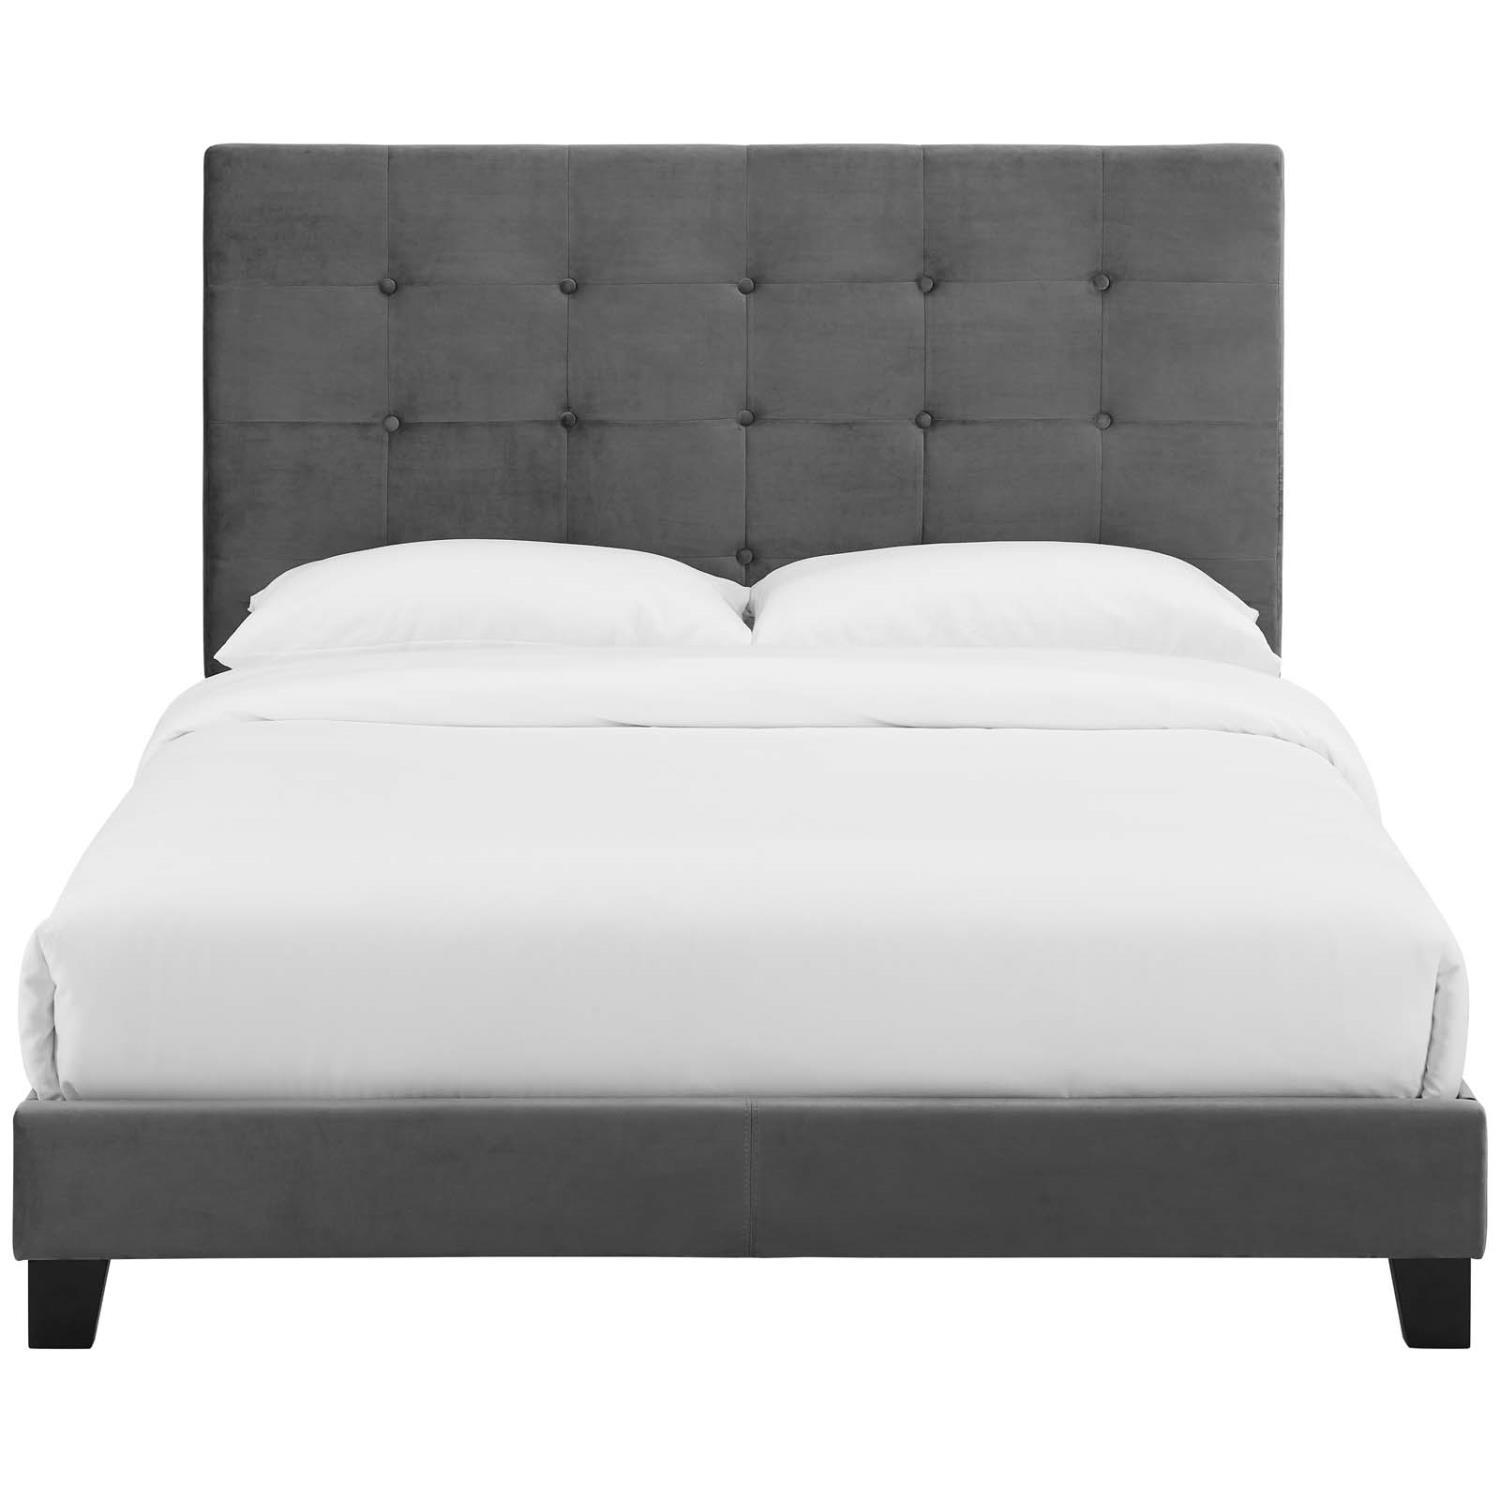 Modway Melanie Full Tufted Button Velvet Platform Bed With Gray MOD-5819-GRY